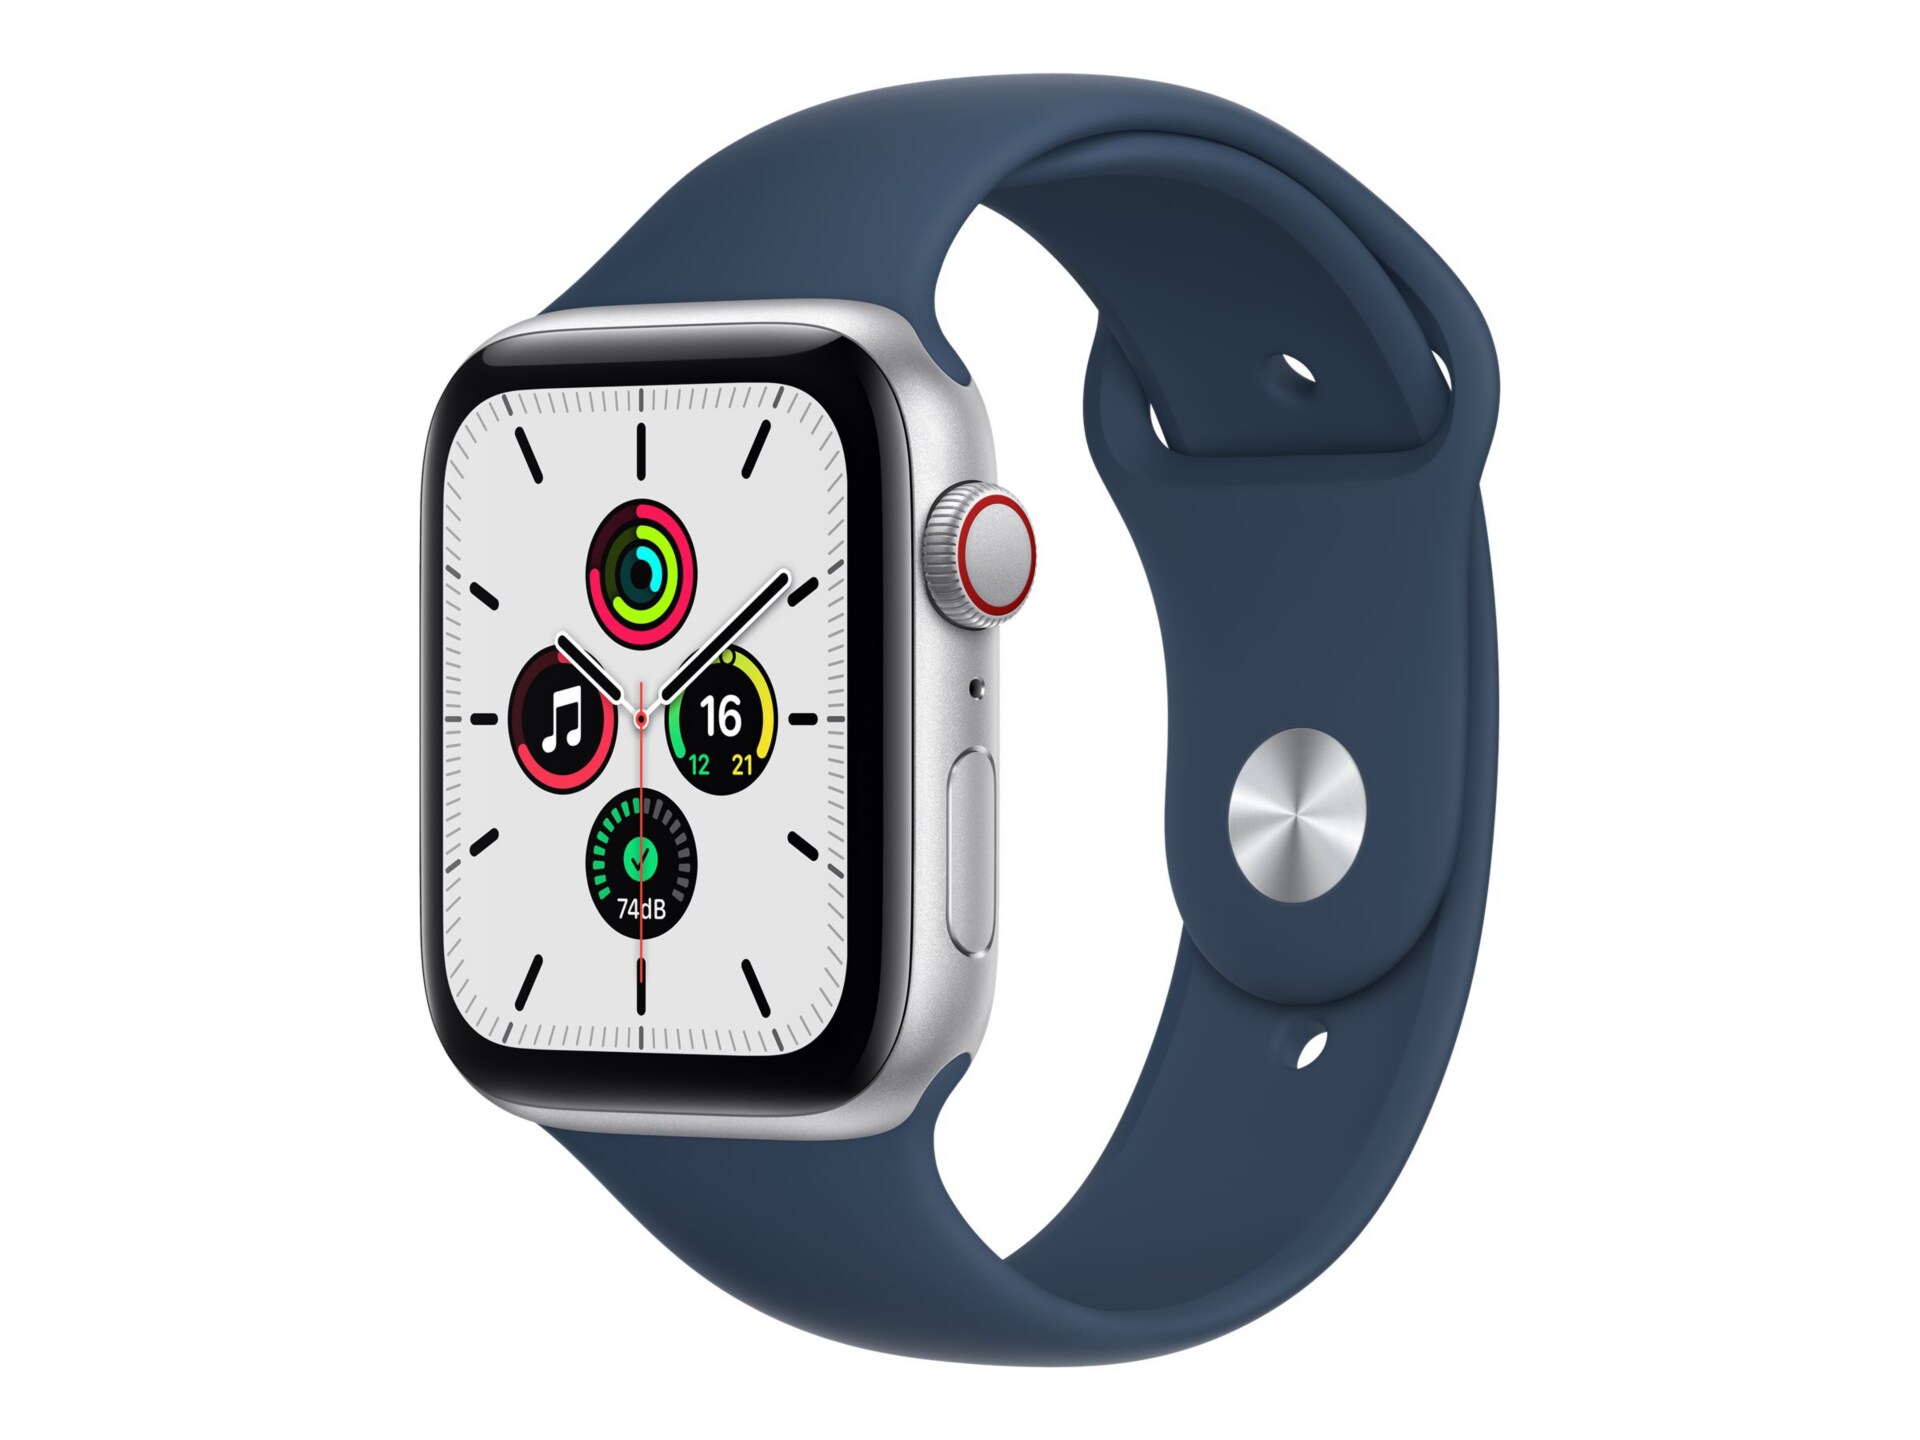 Apple Watch SE (GPS + Cellular) - silver aluminum - smart watch with sport band - abyss blue - 32 GB